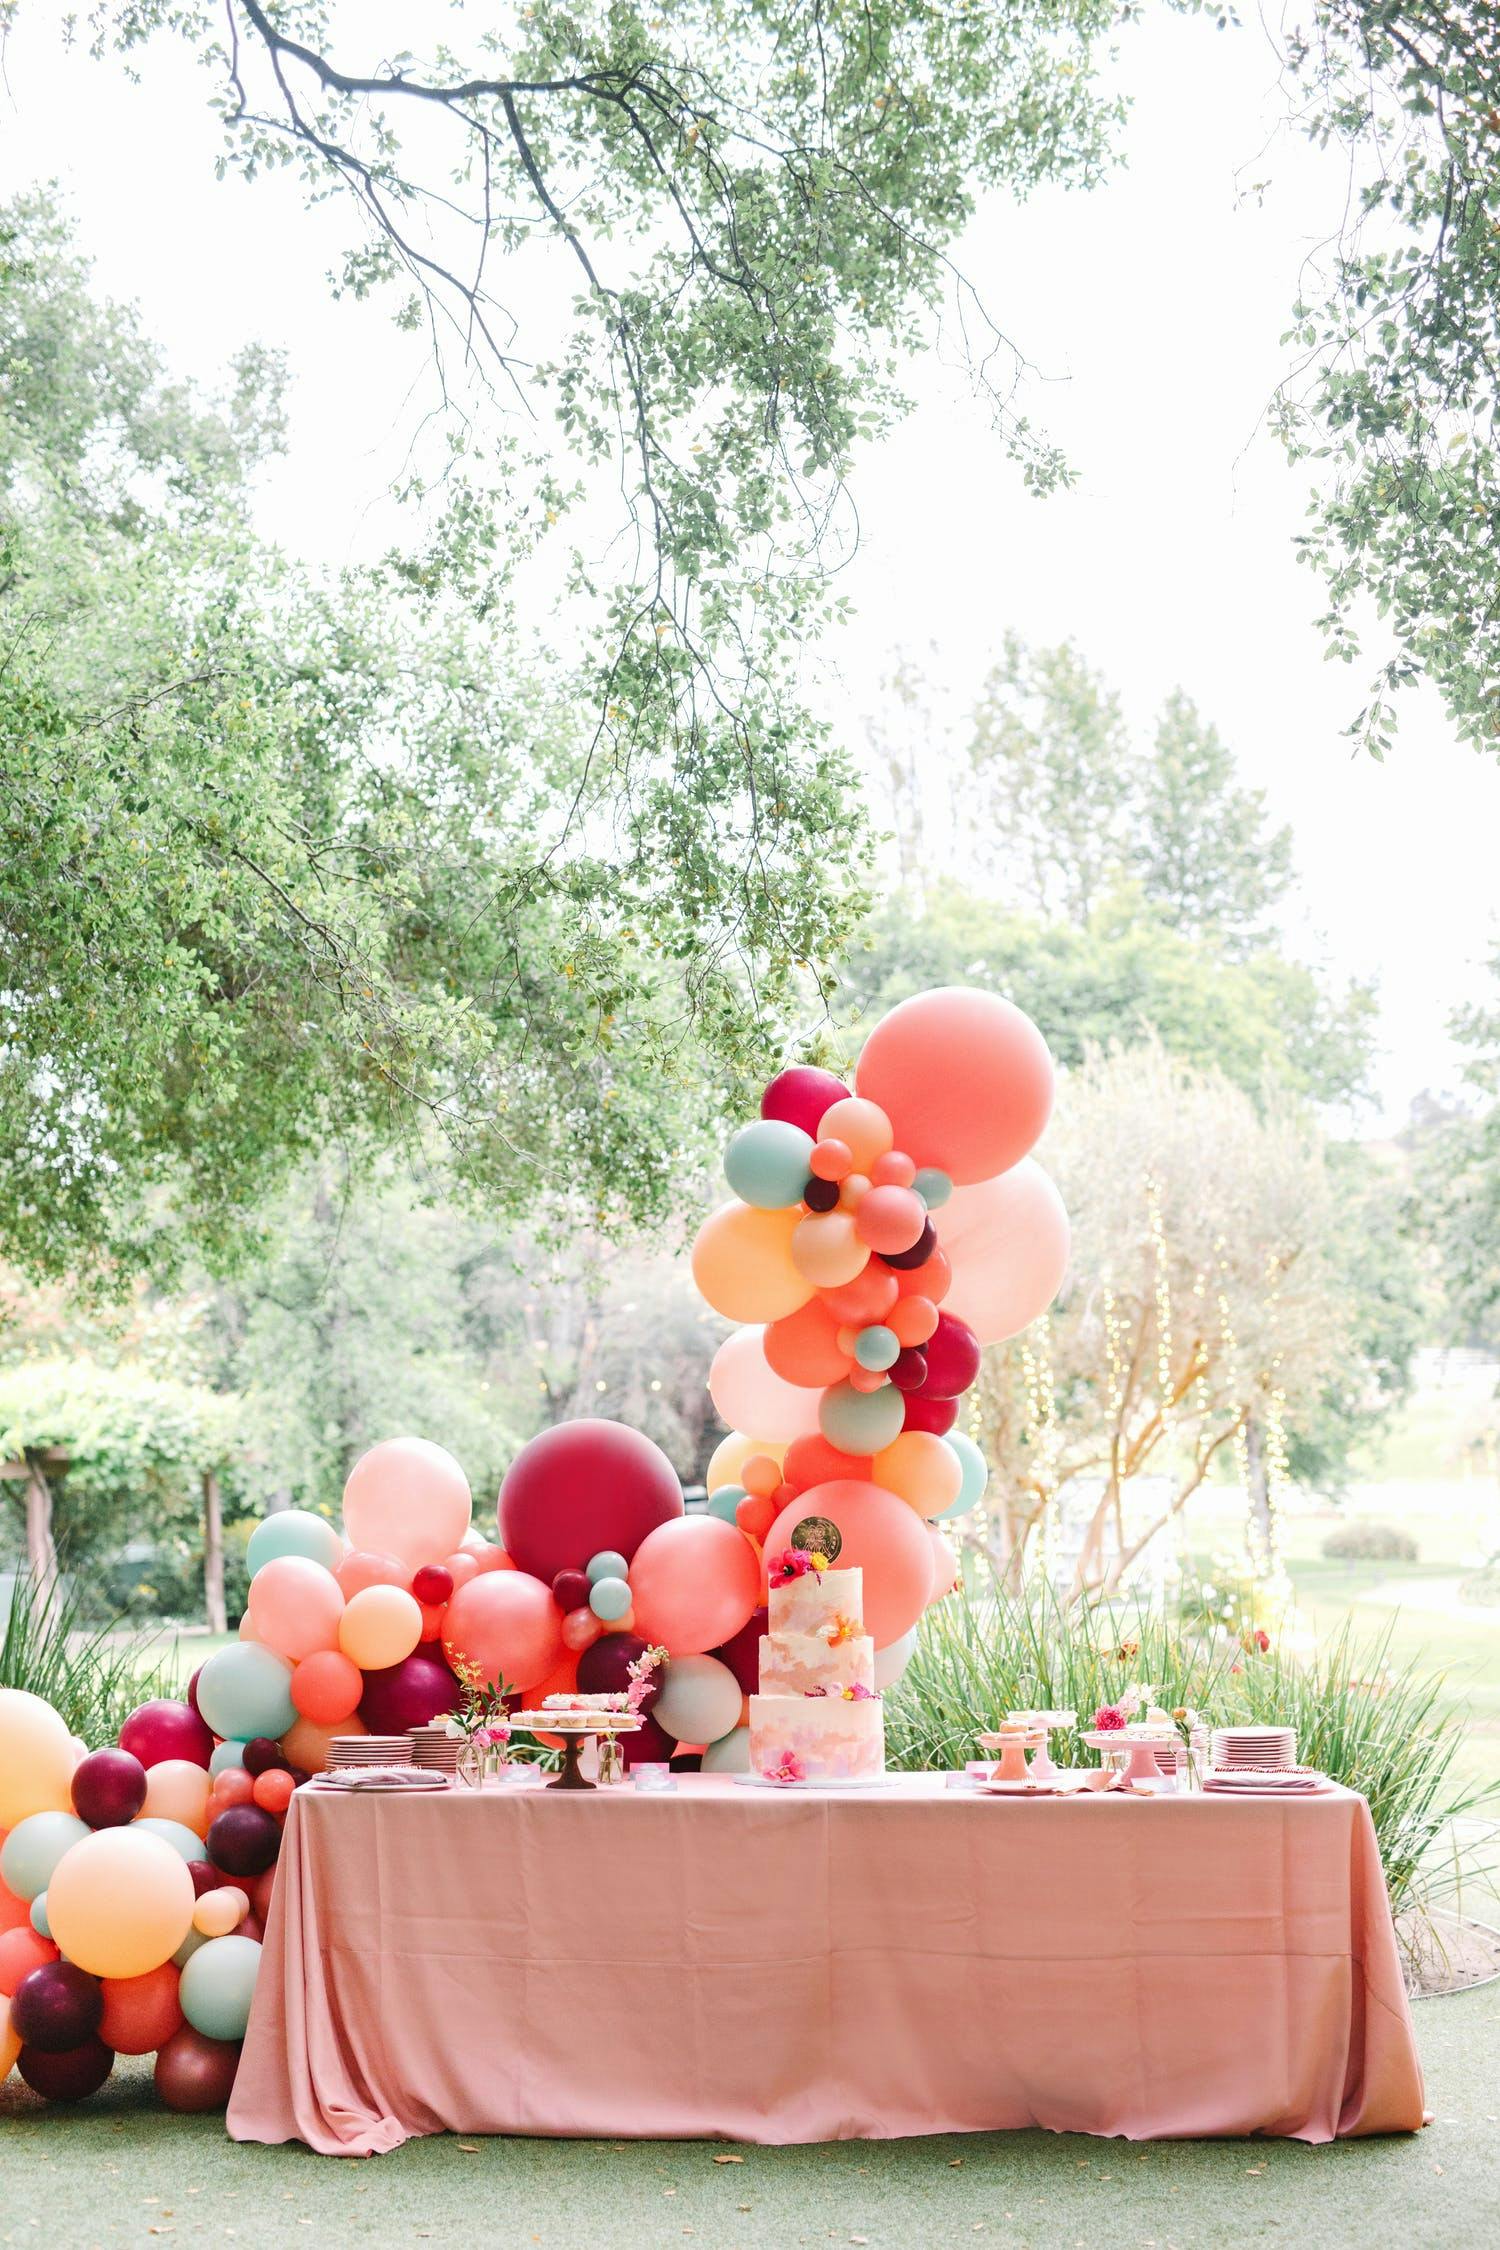 Whimsical balloon arch at outdoor wedding | PartySlate